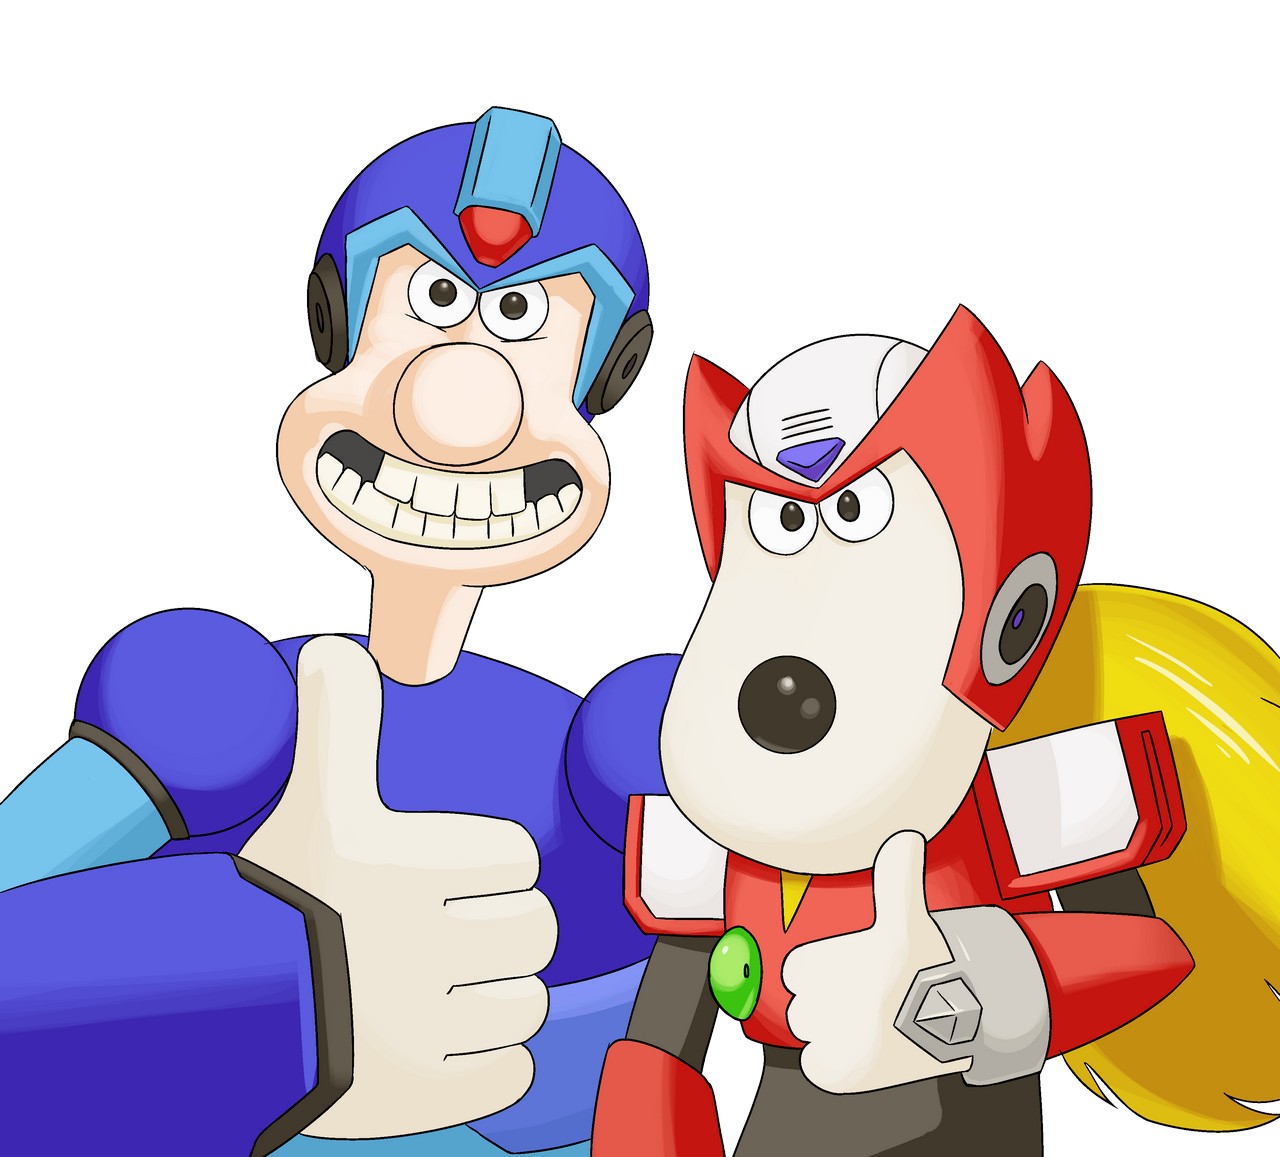 Gromit Wallace And Gromit Mega Man X Character Wallace Wallace And Gromit Zero Mega Man By Mrapplegat